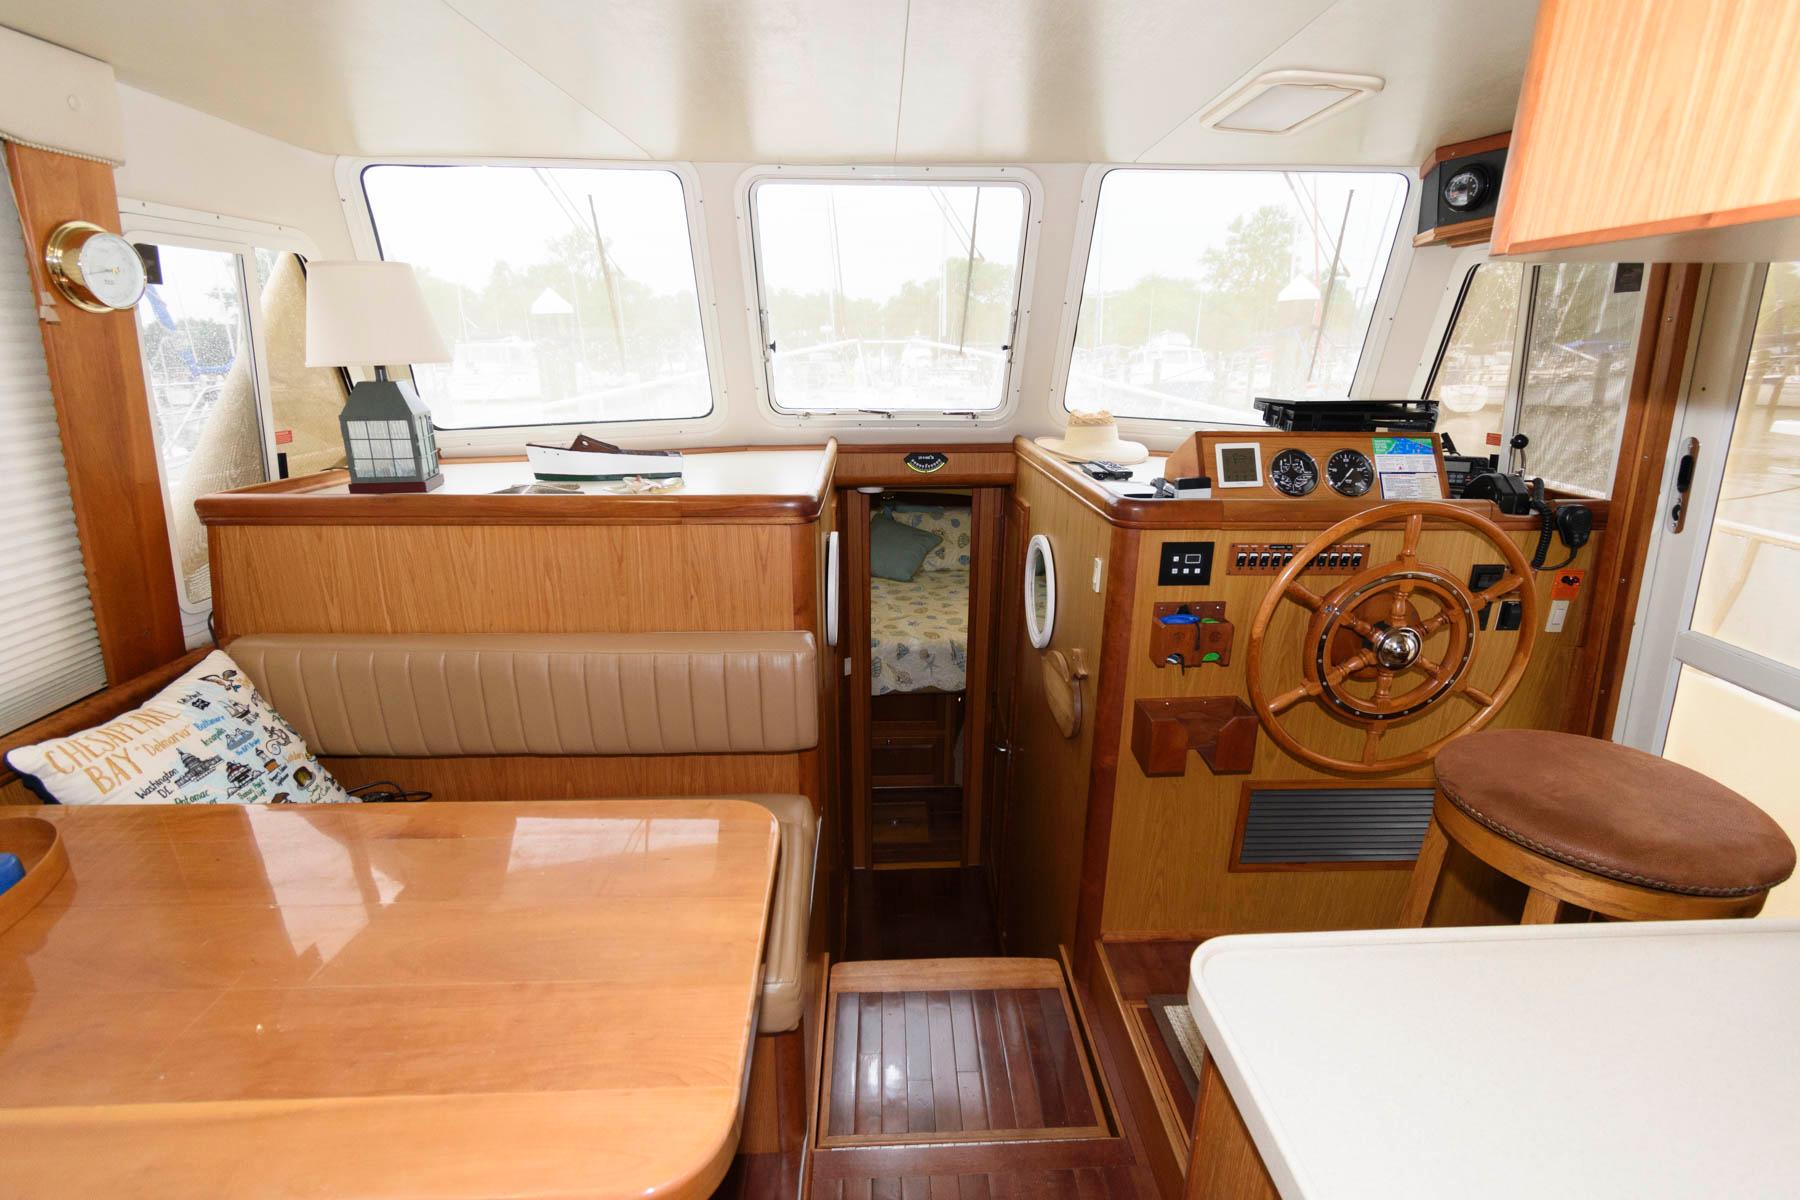 M 6235 MD Knot 10 Yacht Sales